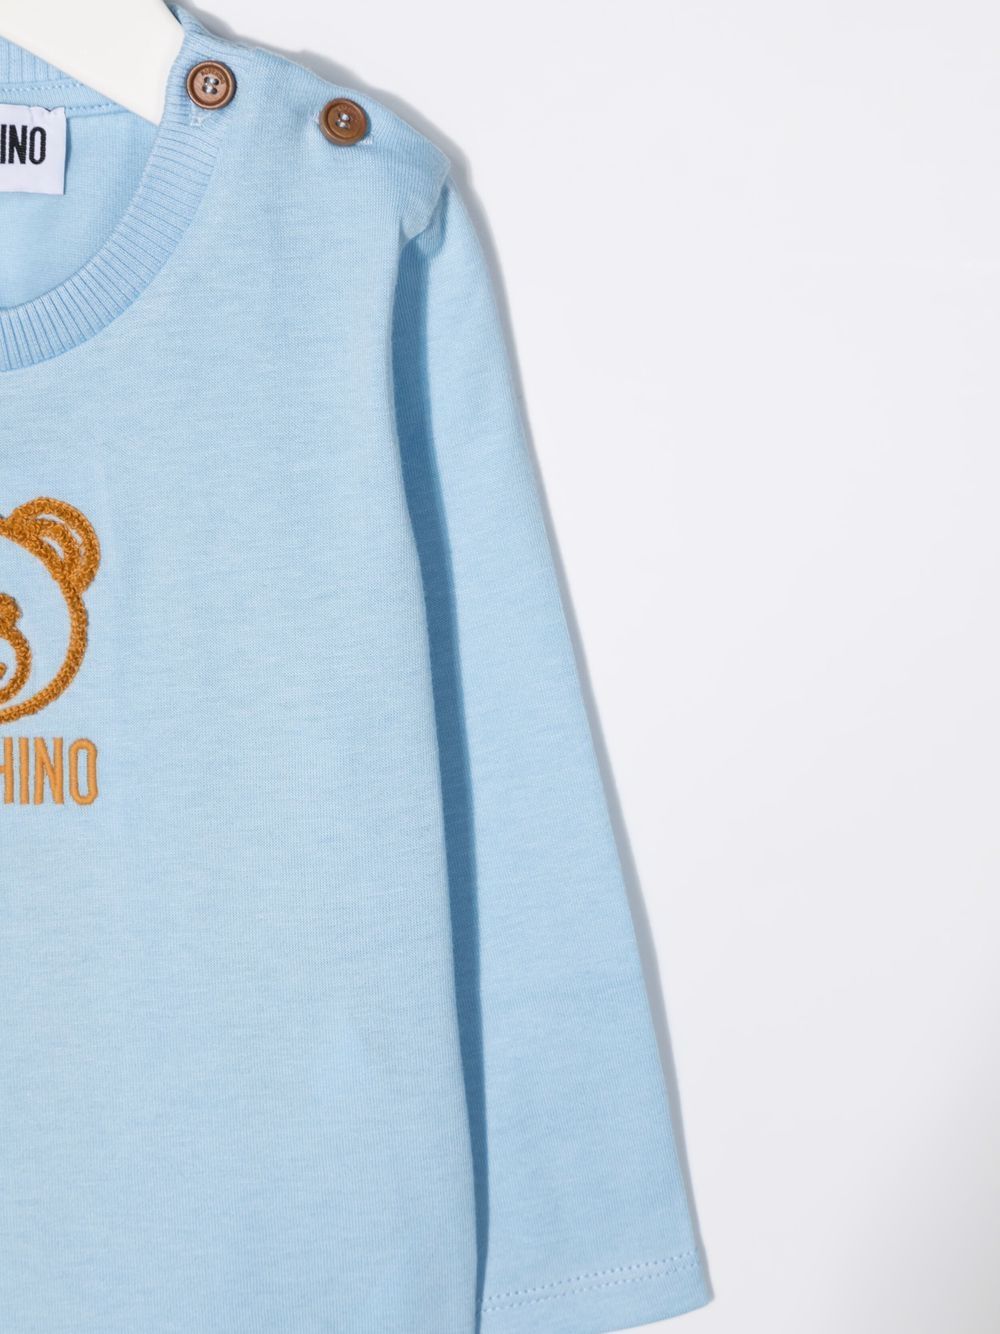 Shop Moschino Embroidered Teddy Bear T-shirt In Blue